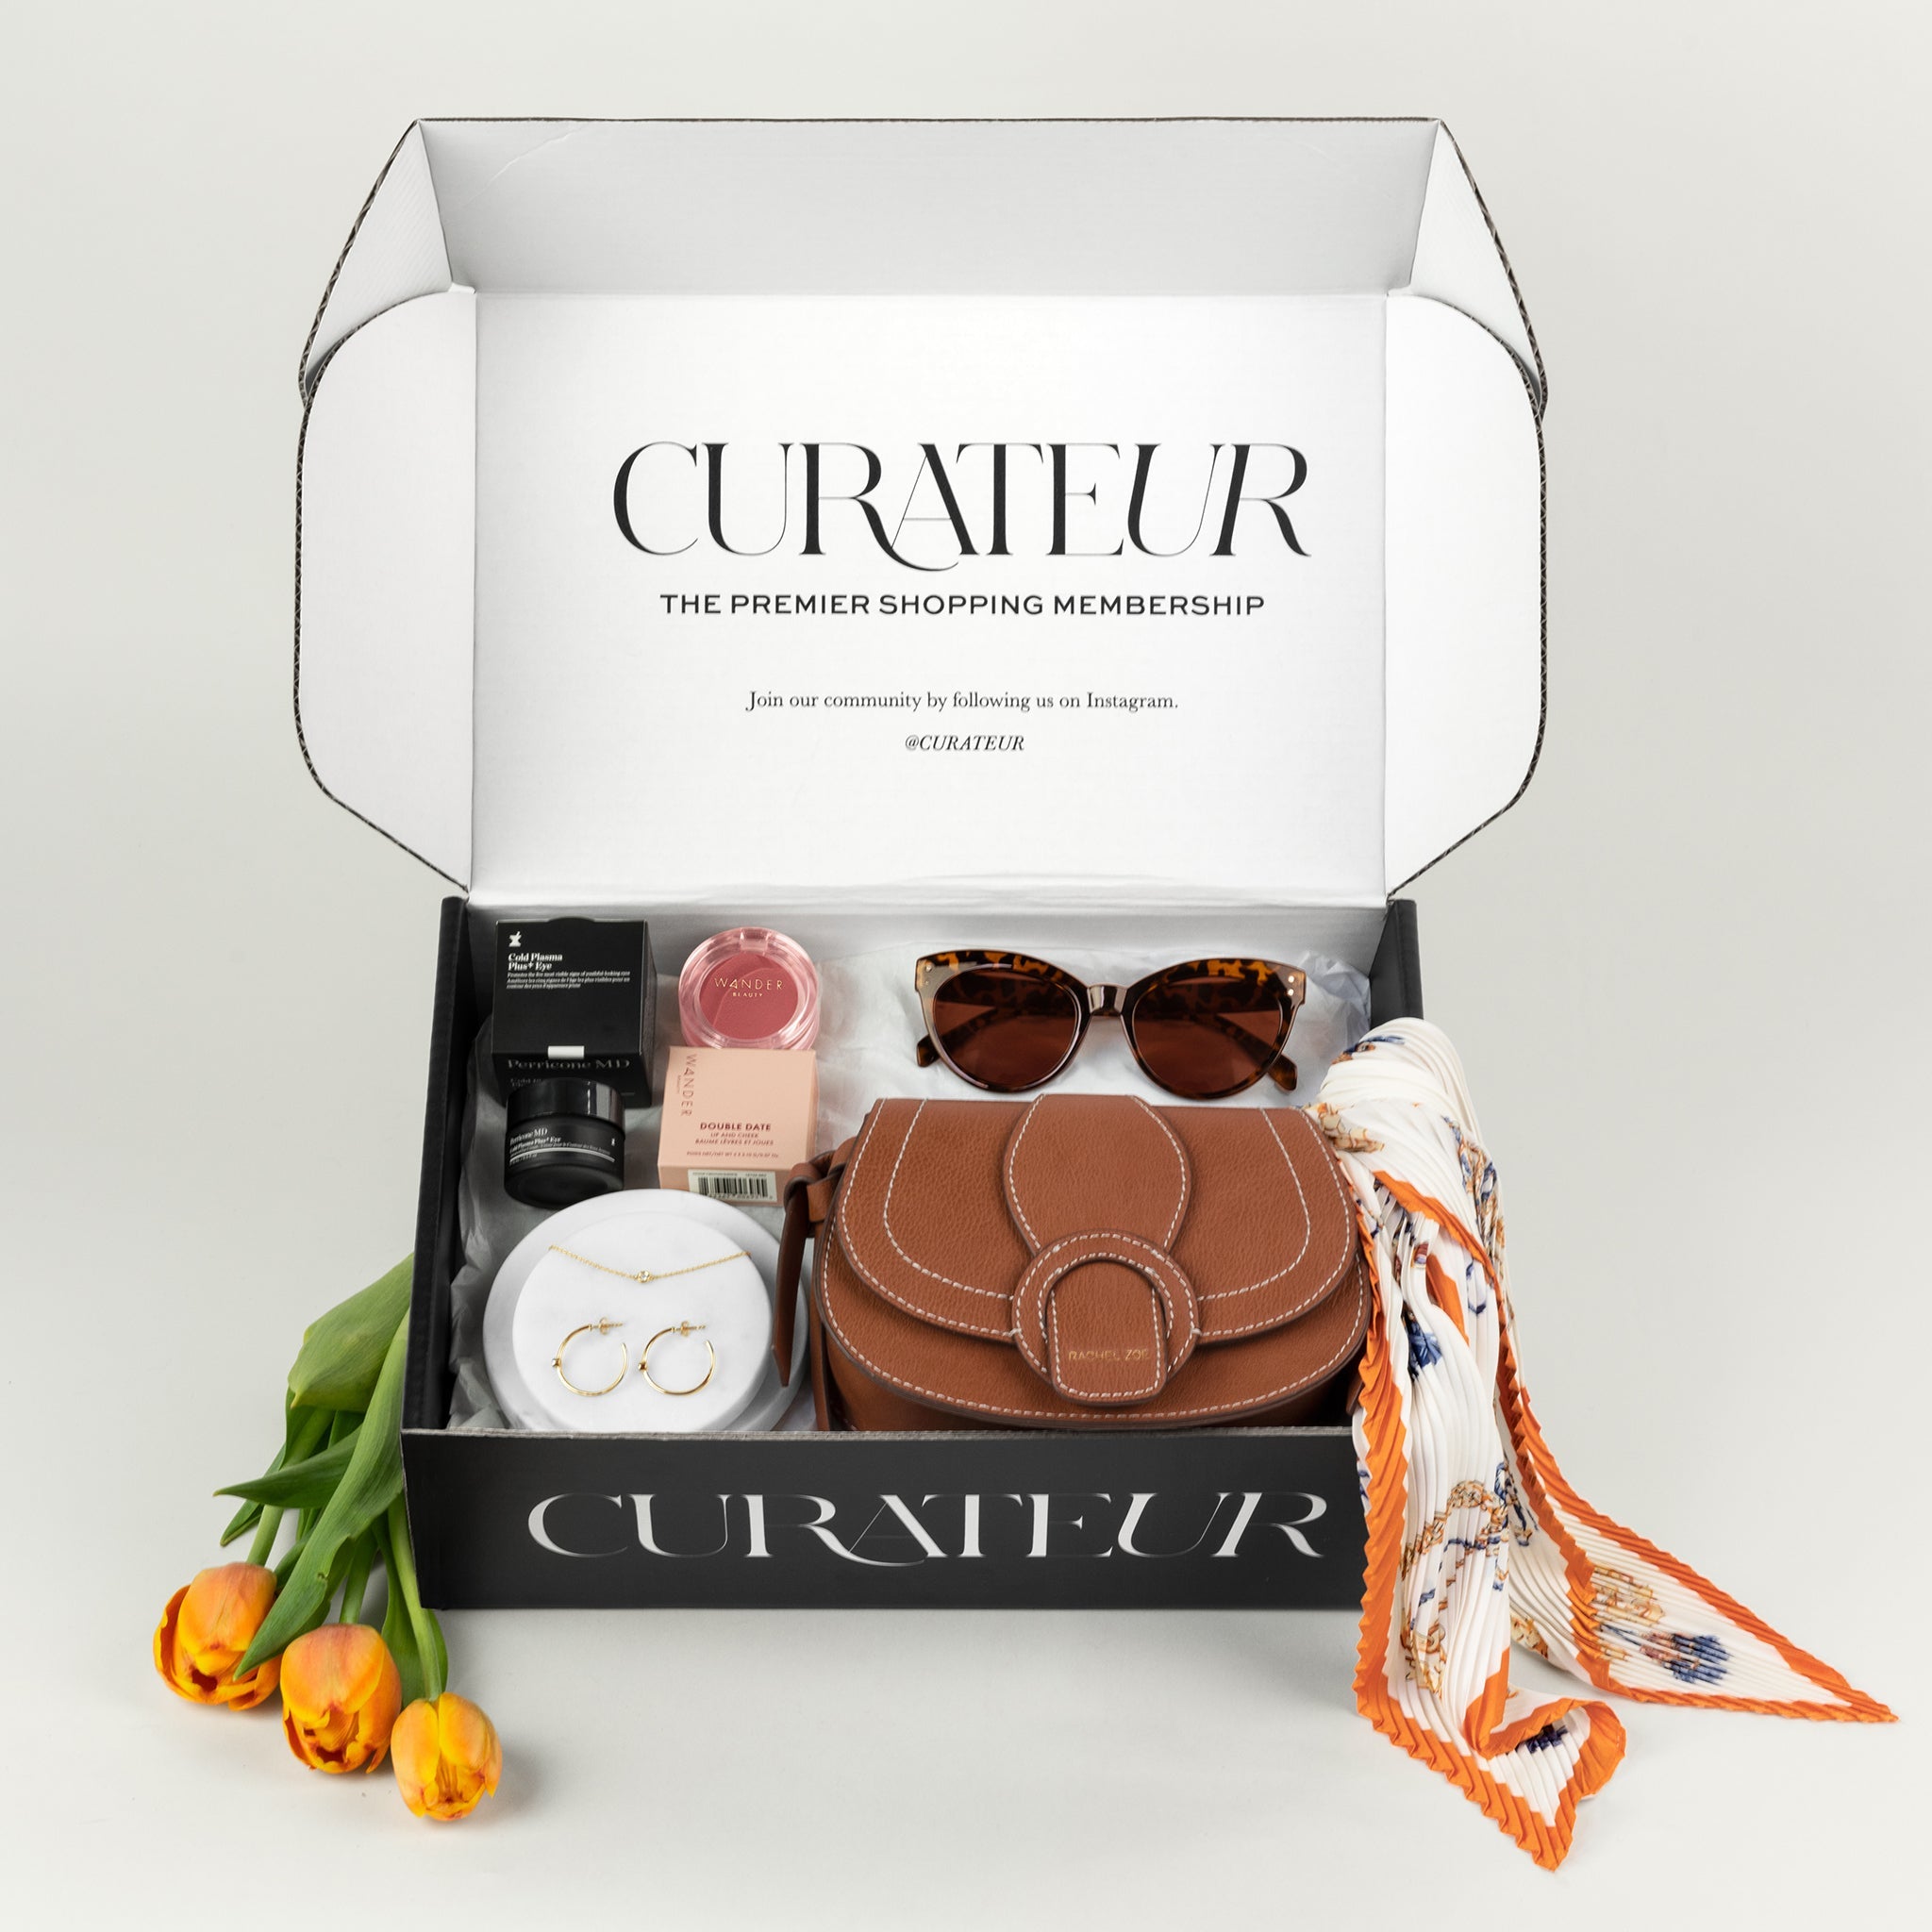 Rachel Zoe Summer Curateur Box Chic At Every Age